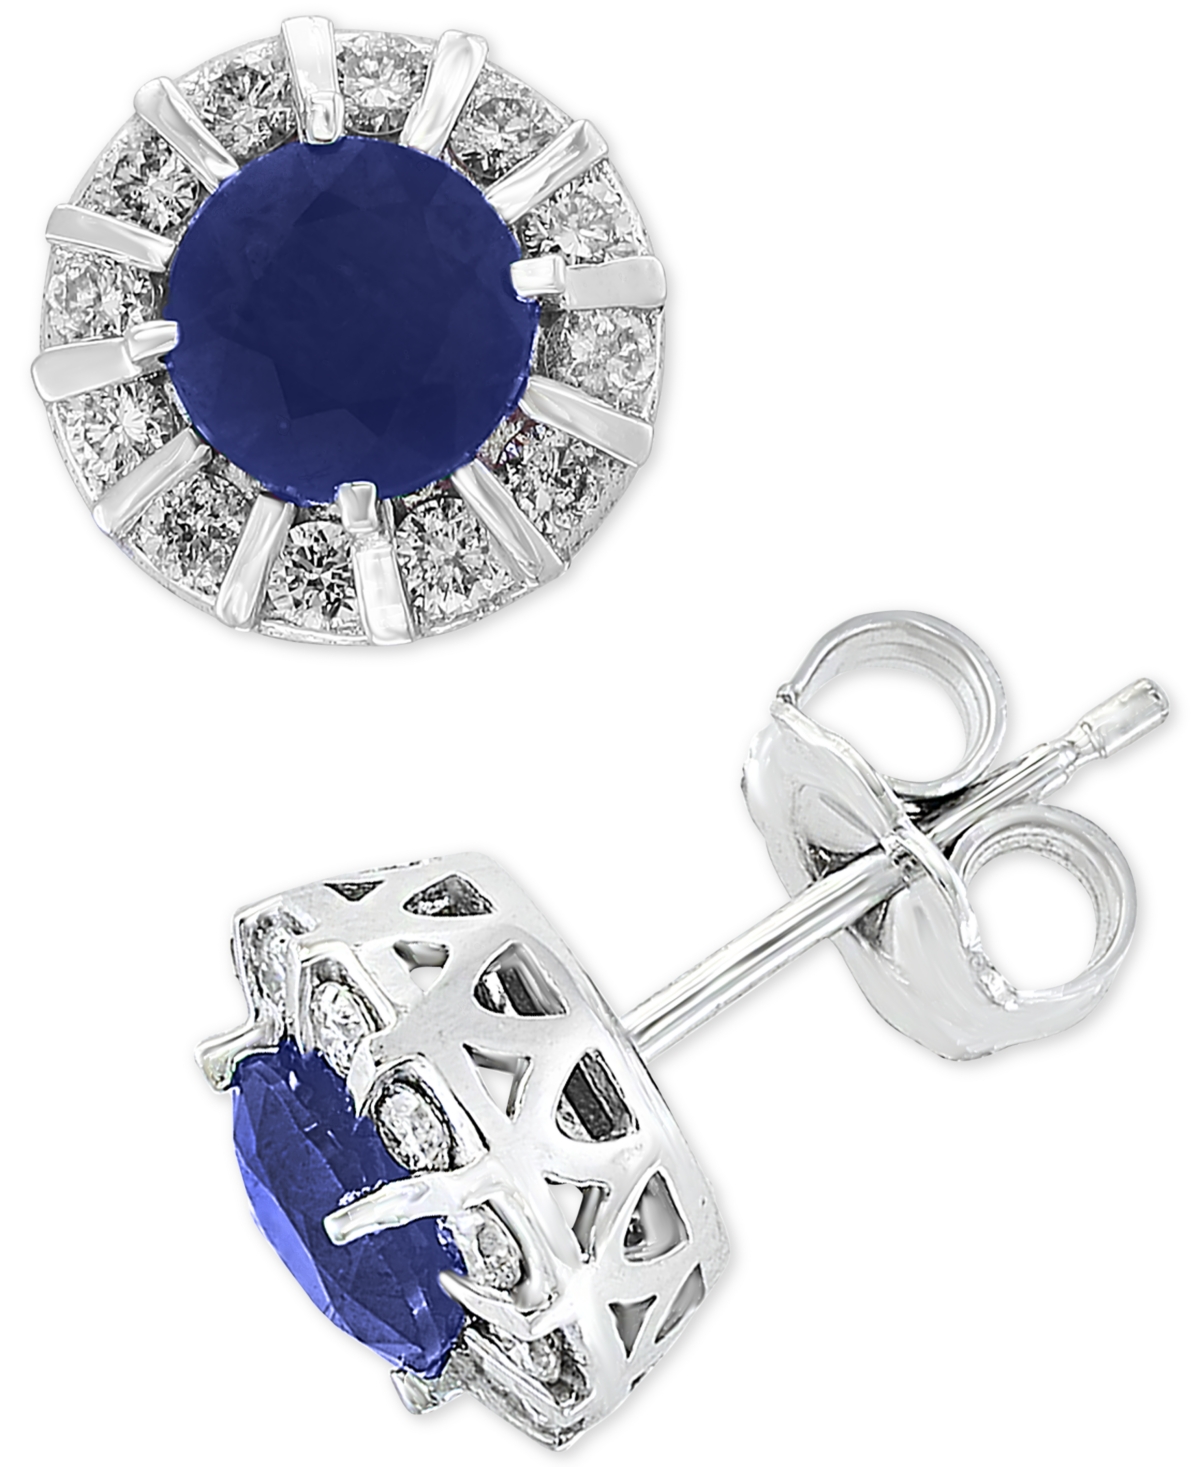 Effy Tanzanite (9/10 ct. t.w.) & Diamond (1/3 ct. t.w.) Stud Earrings in 14k White Gold (Also available in Ruby, Emerald & Sapphire) - Tanzanite/k Yel